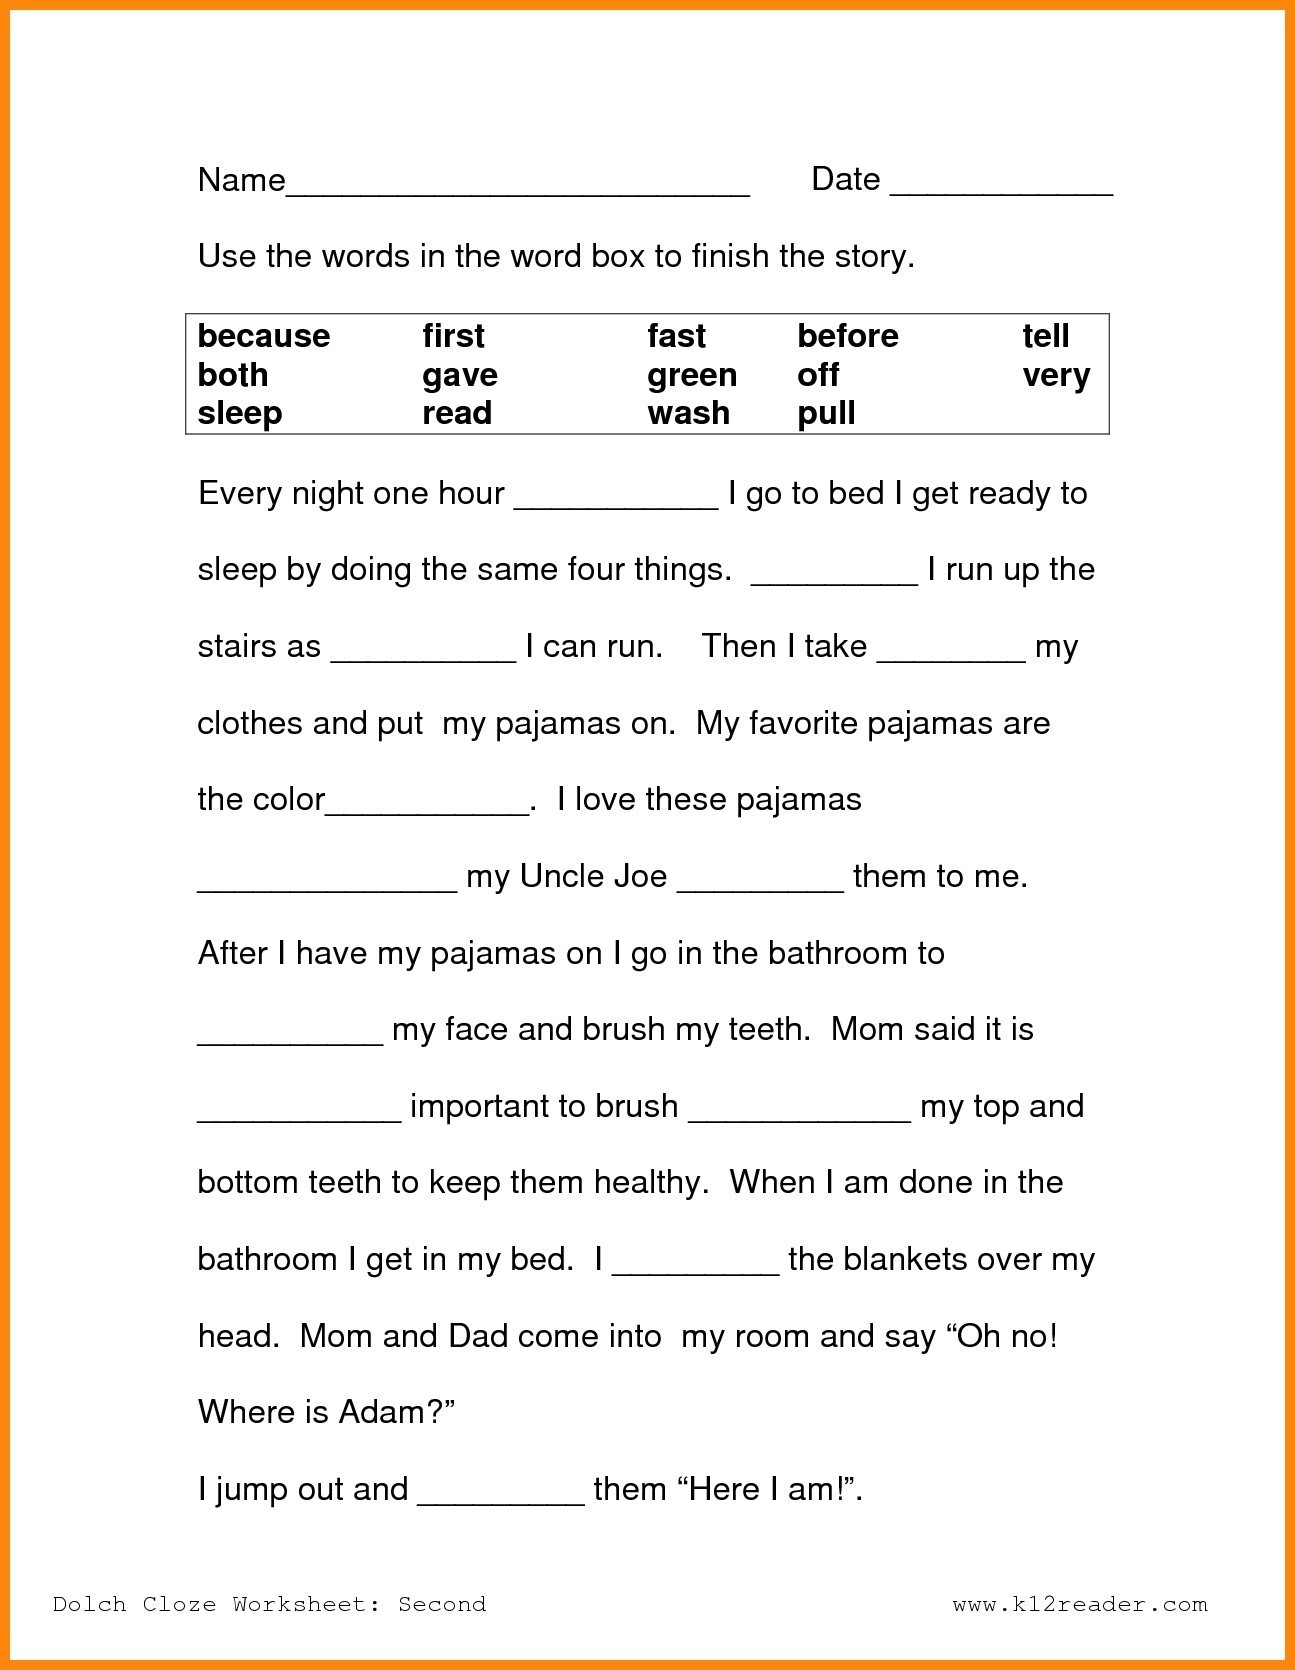 Free Printable Reading Worksheets For 2Nd Grade Lovely Reading - Free Printable Worksheets For 2Nd Grade